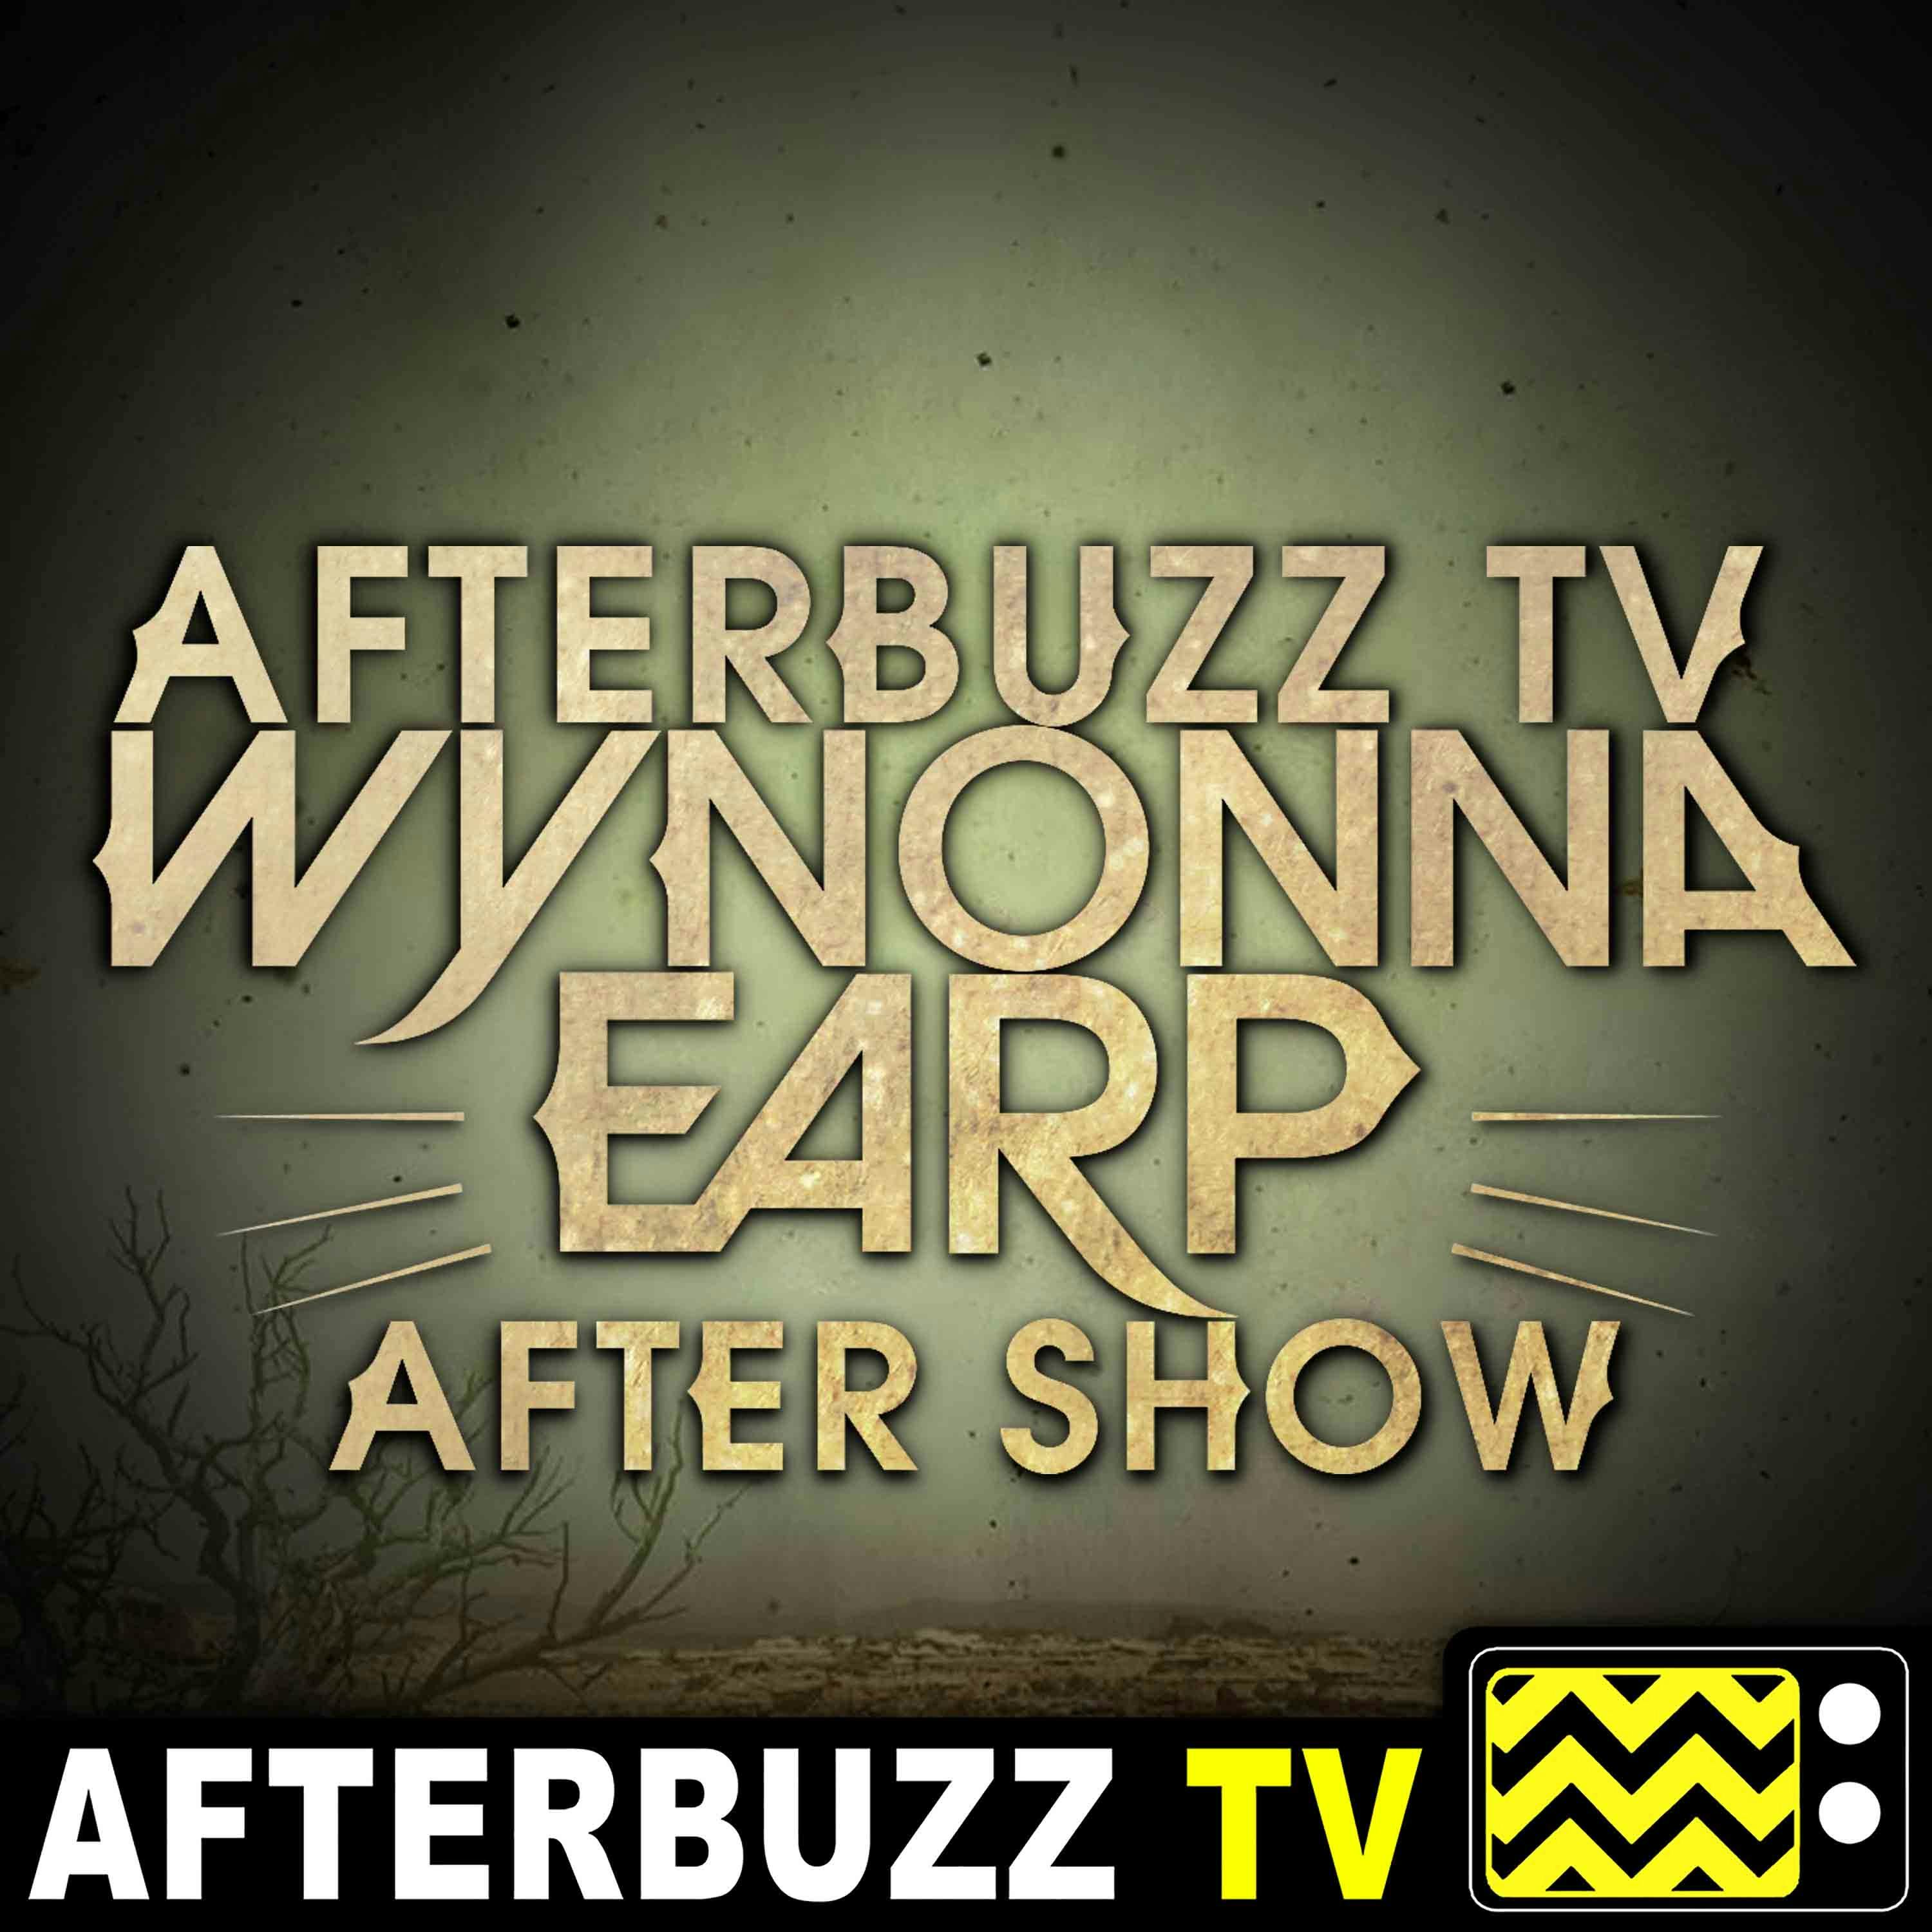 Wynonna Earp S:3 | When You Call My Name E:2 | AfterBuzz TV AfterShow